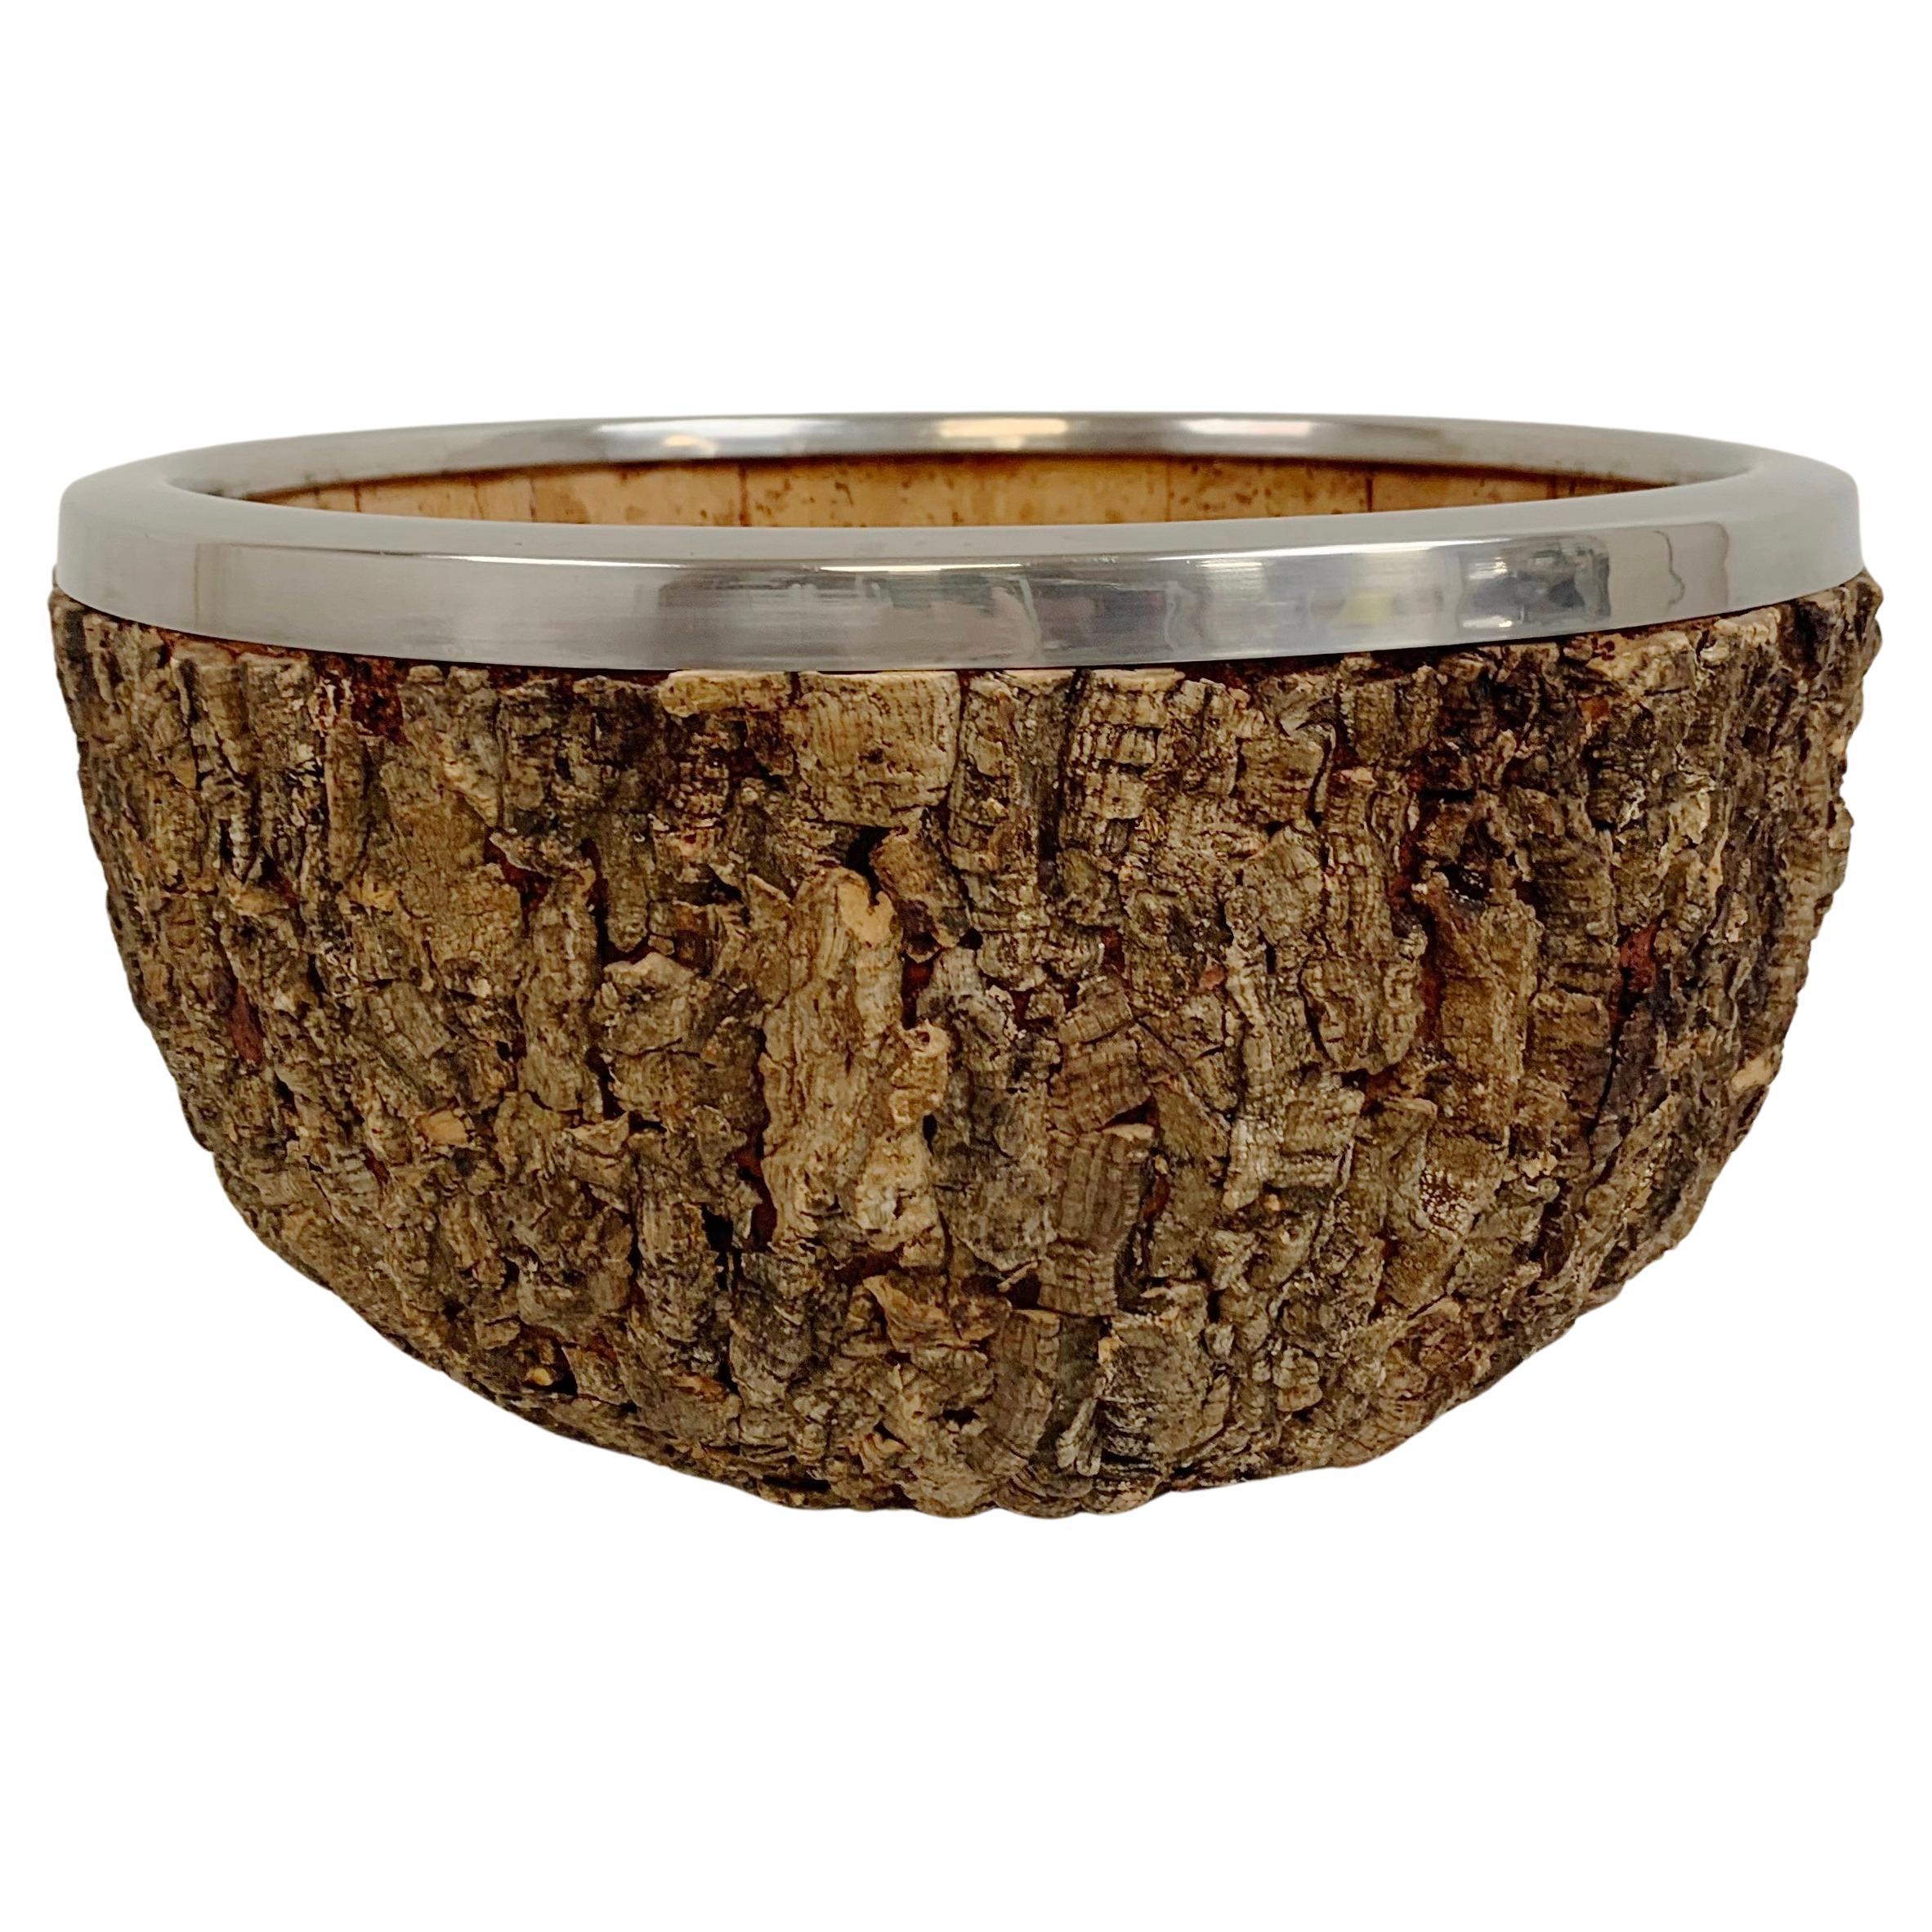 Gabrielle Crespi Signed Large Cork Bowl, circa 1974, Italy. For Sale